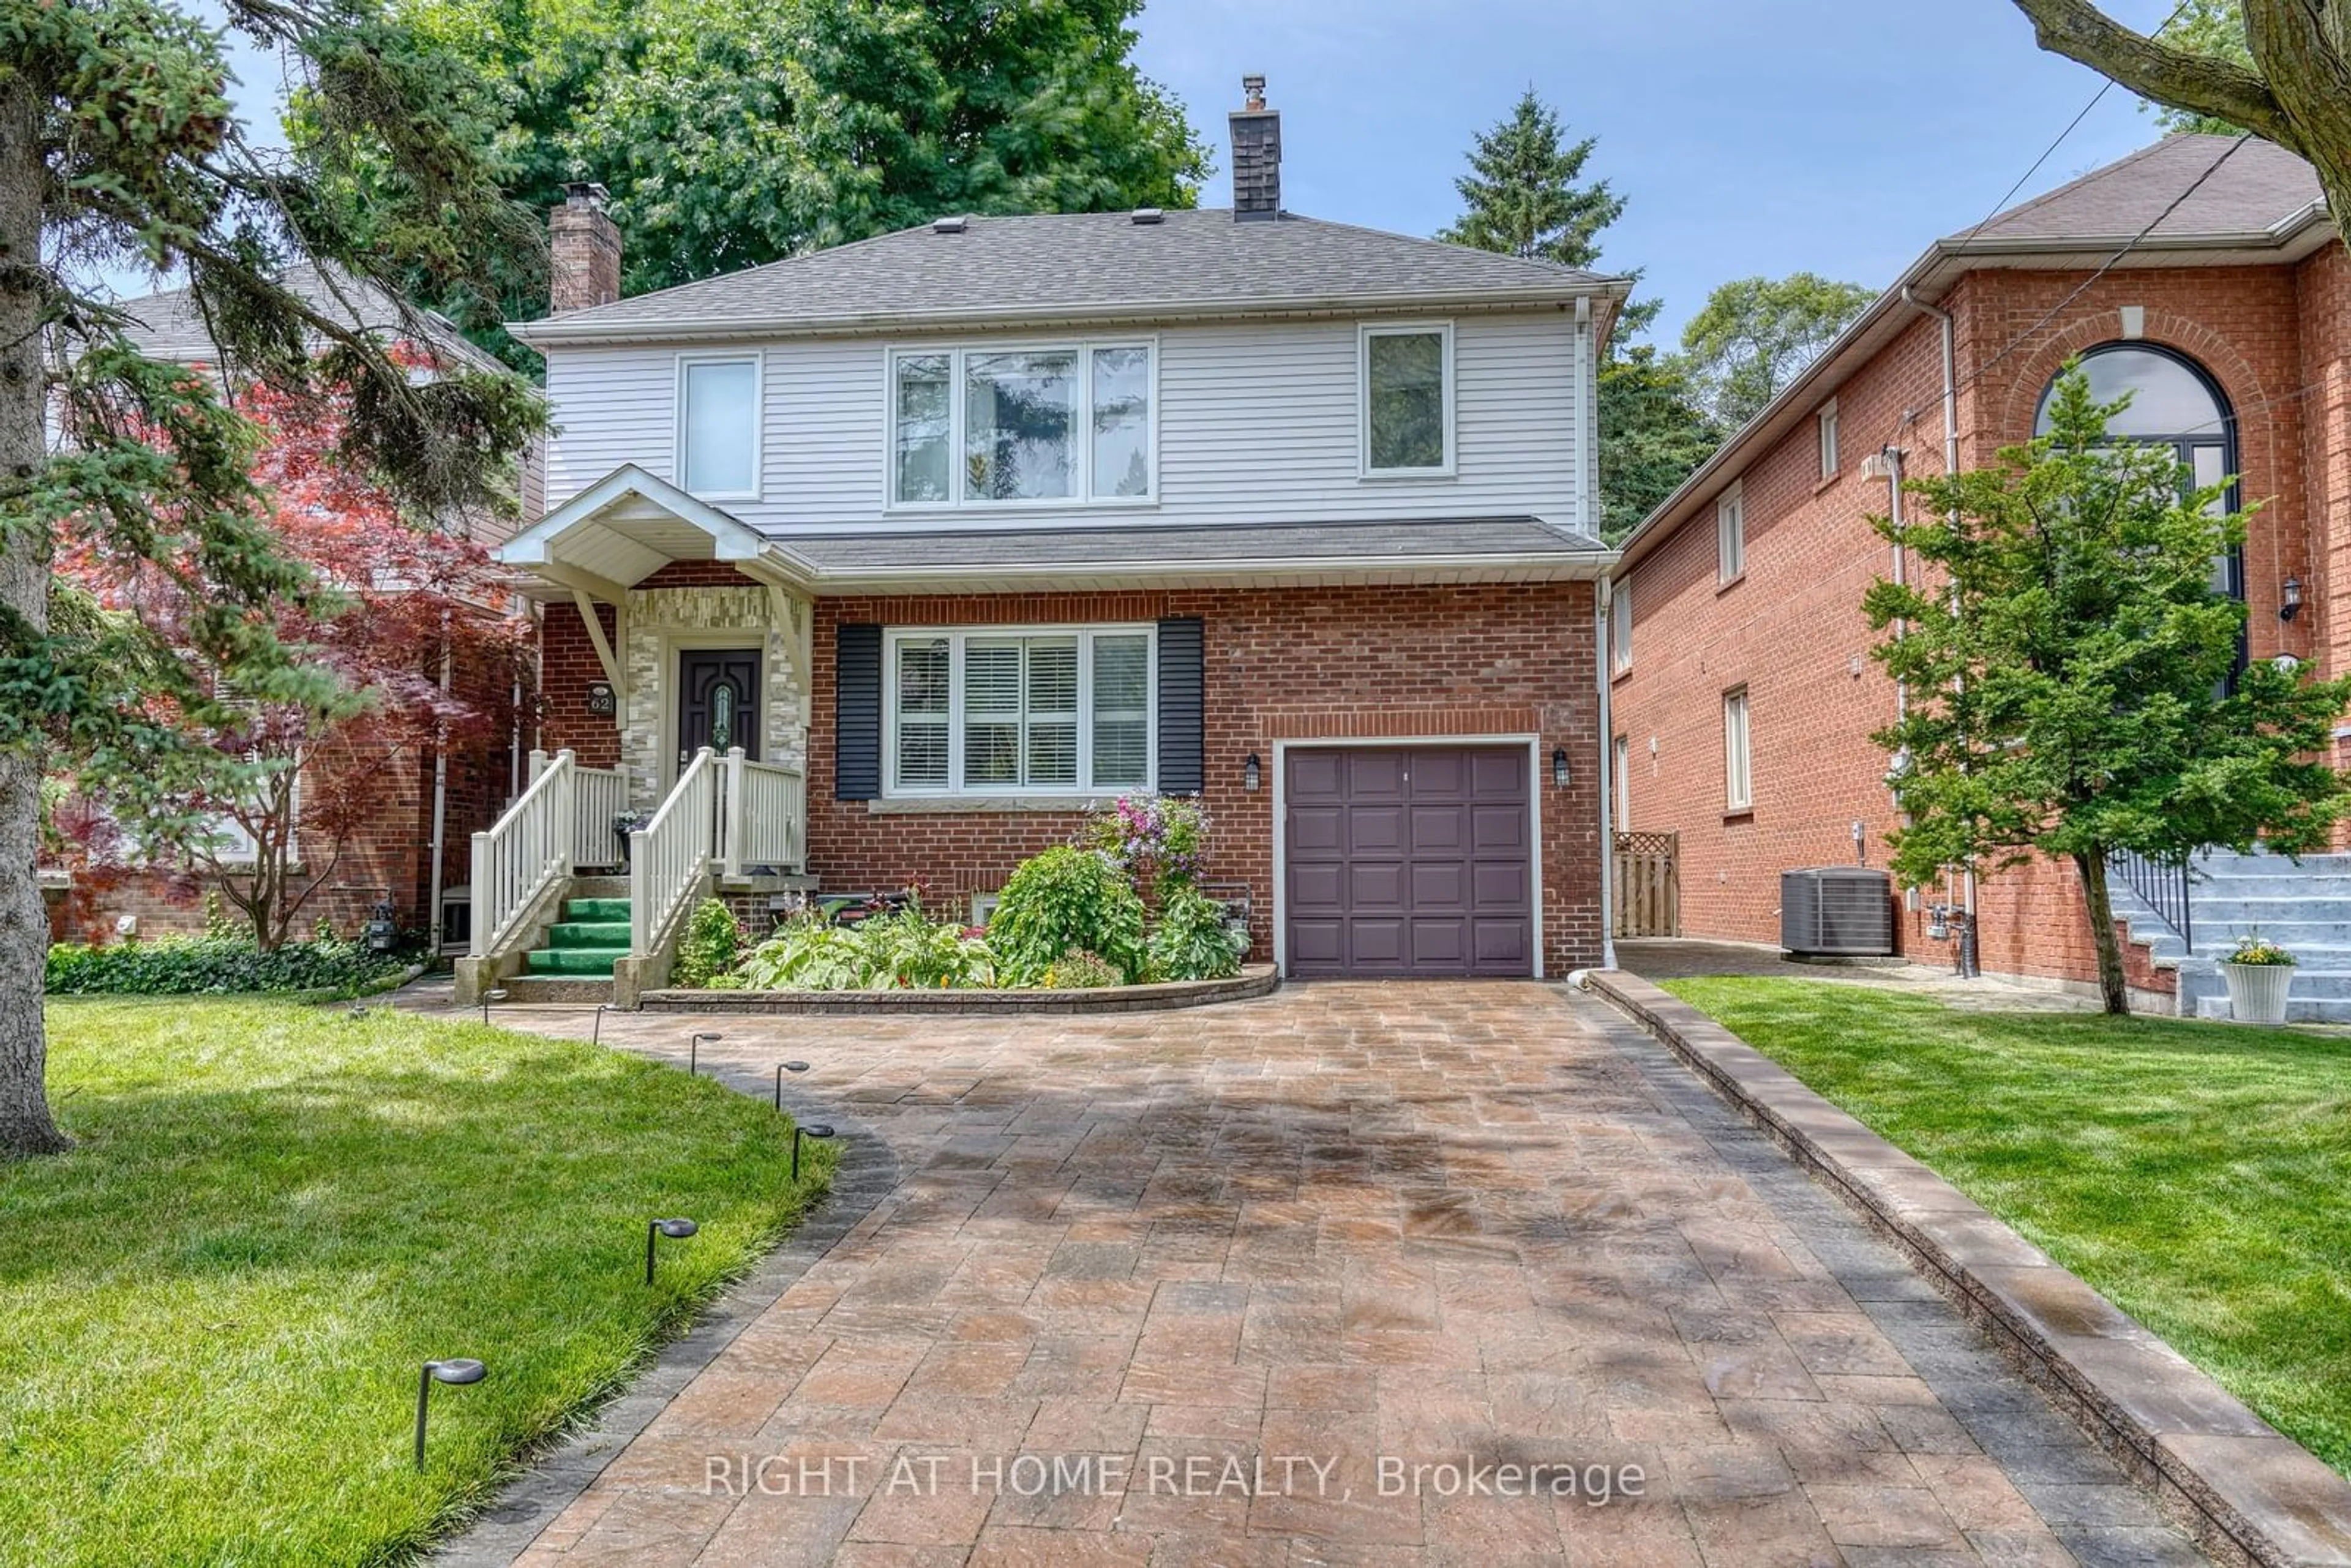 Home with brick exterior material for 62 Belgrave Ave, Toronto Ontario M5M 3T1